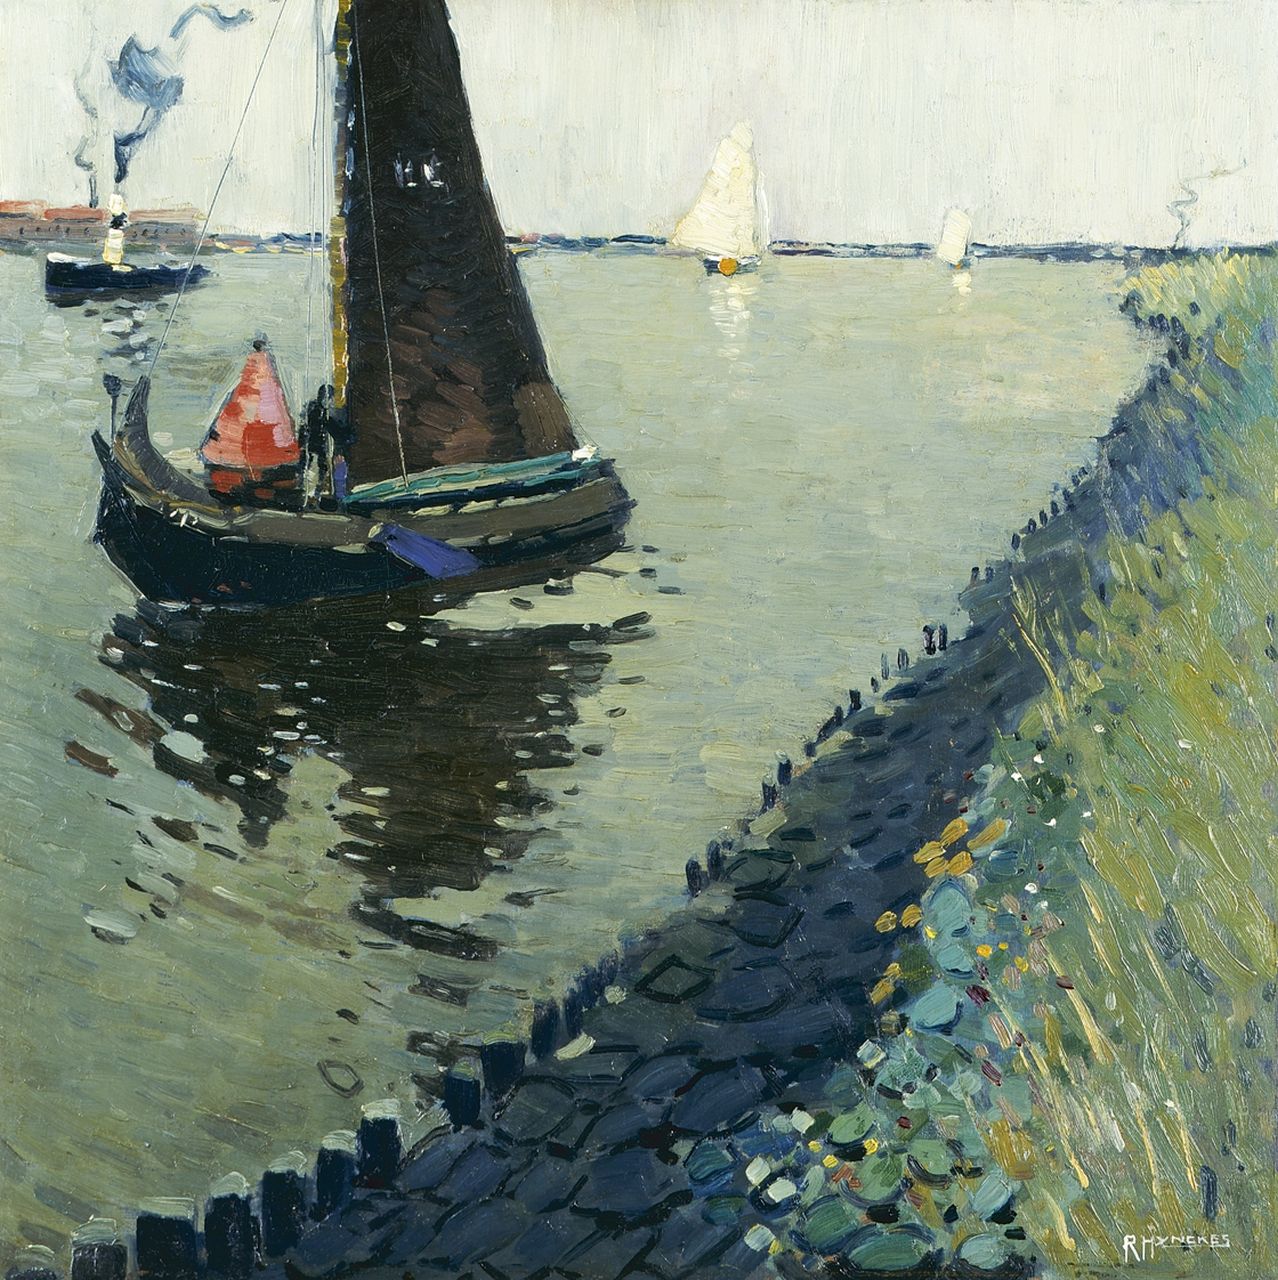 Hynckes R.  | Raoul Hynckes, A fishing boat on the Zuiderzee, 54,8 x 55,0 cm, signed l.r. und painted between 1912-1916